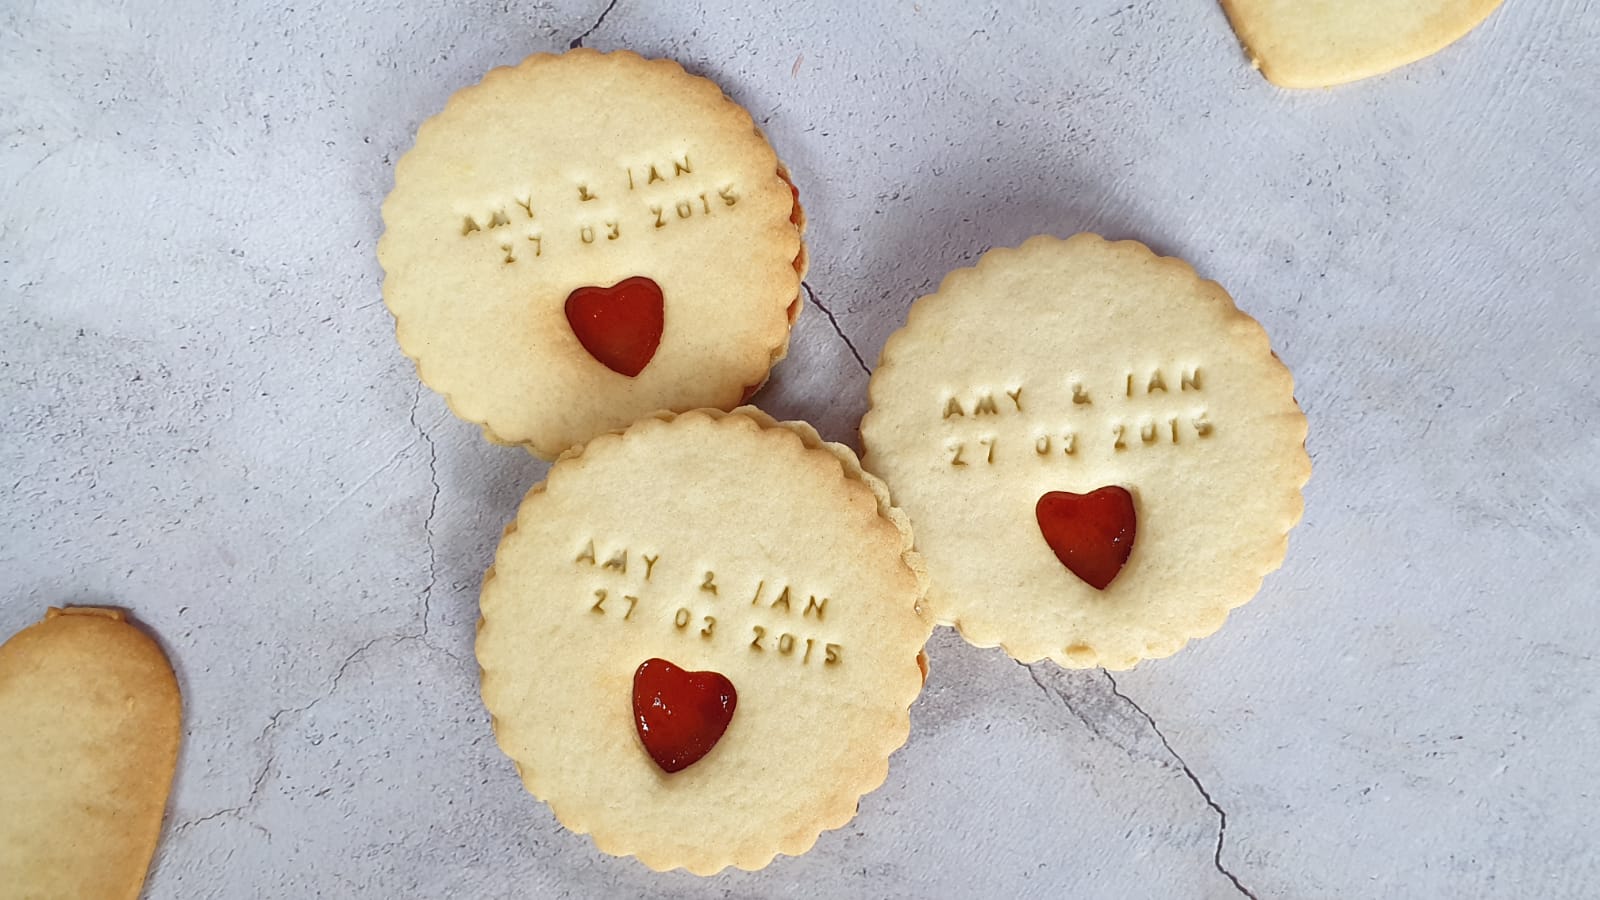 personalised wedding biscuits filled with jam made by Bloom Bakers